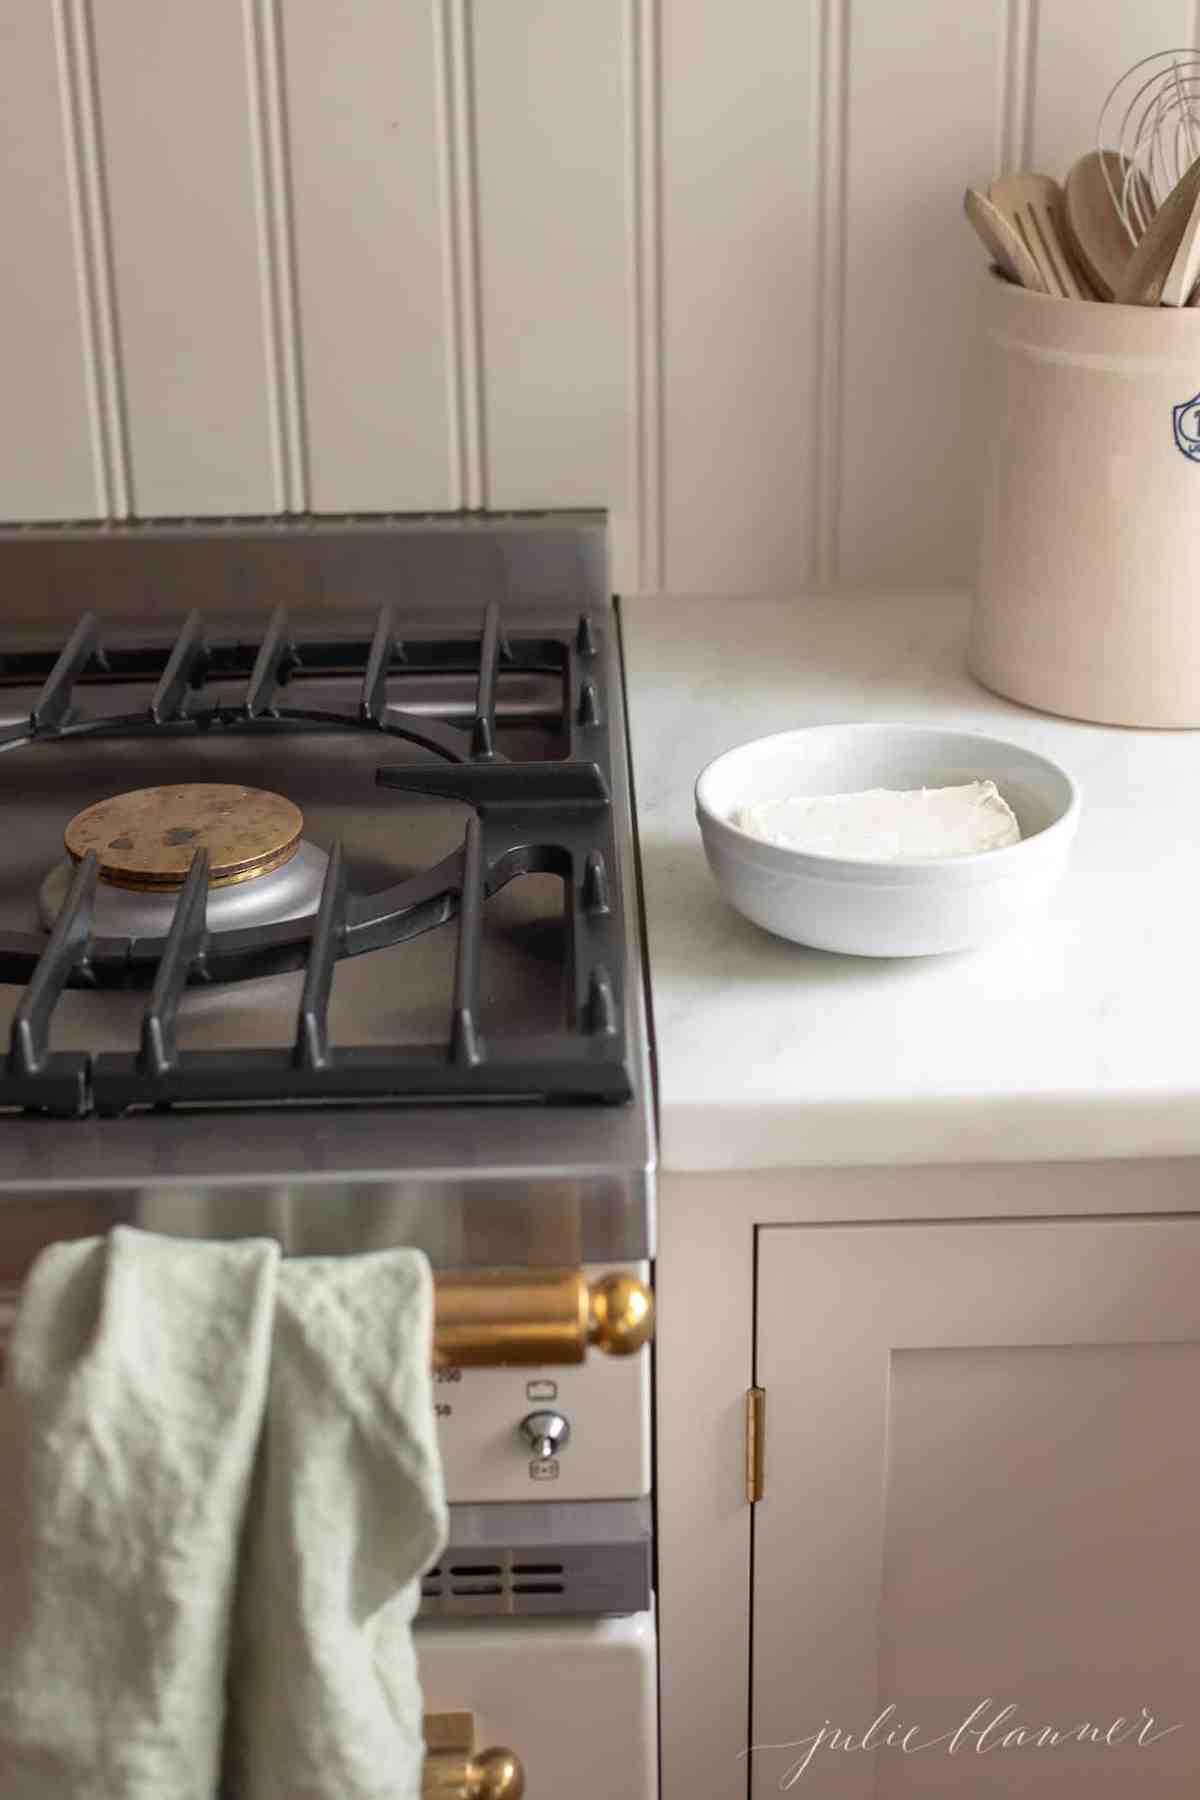 Ivory and brass range with a bowl of cream cheese on the counter beside it.